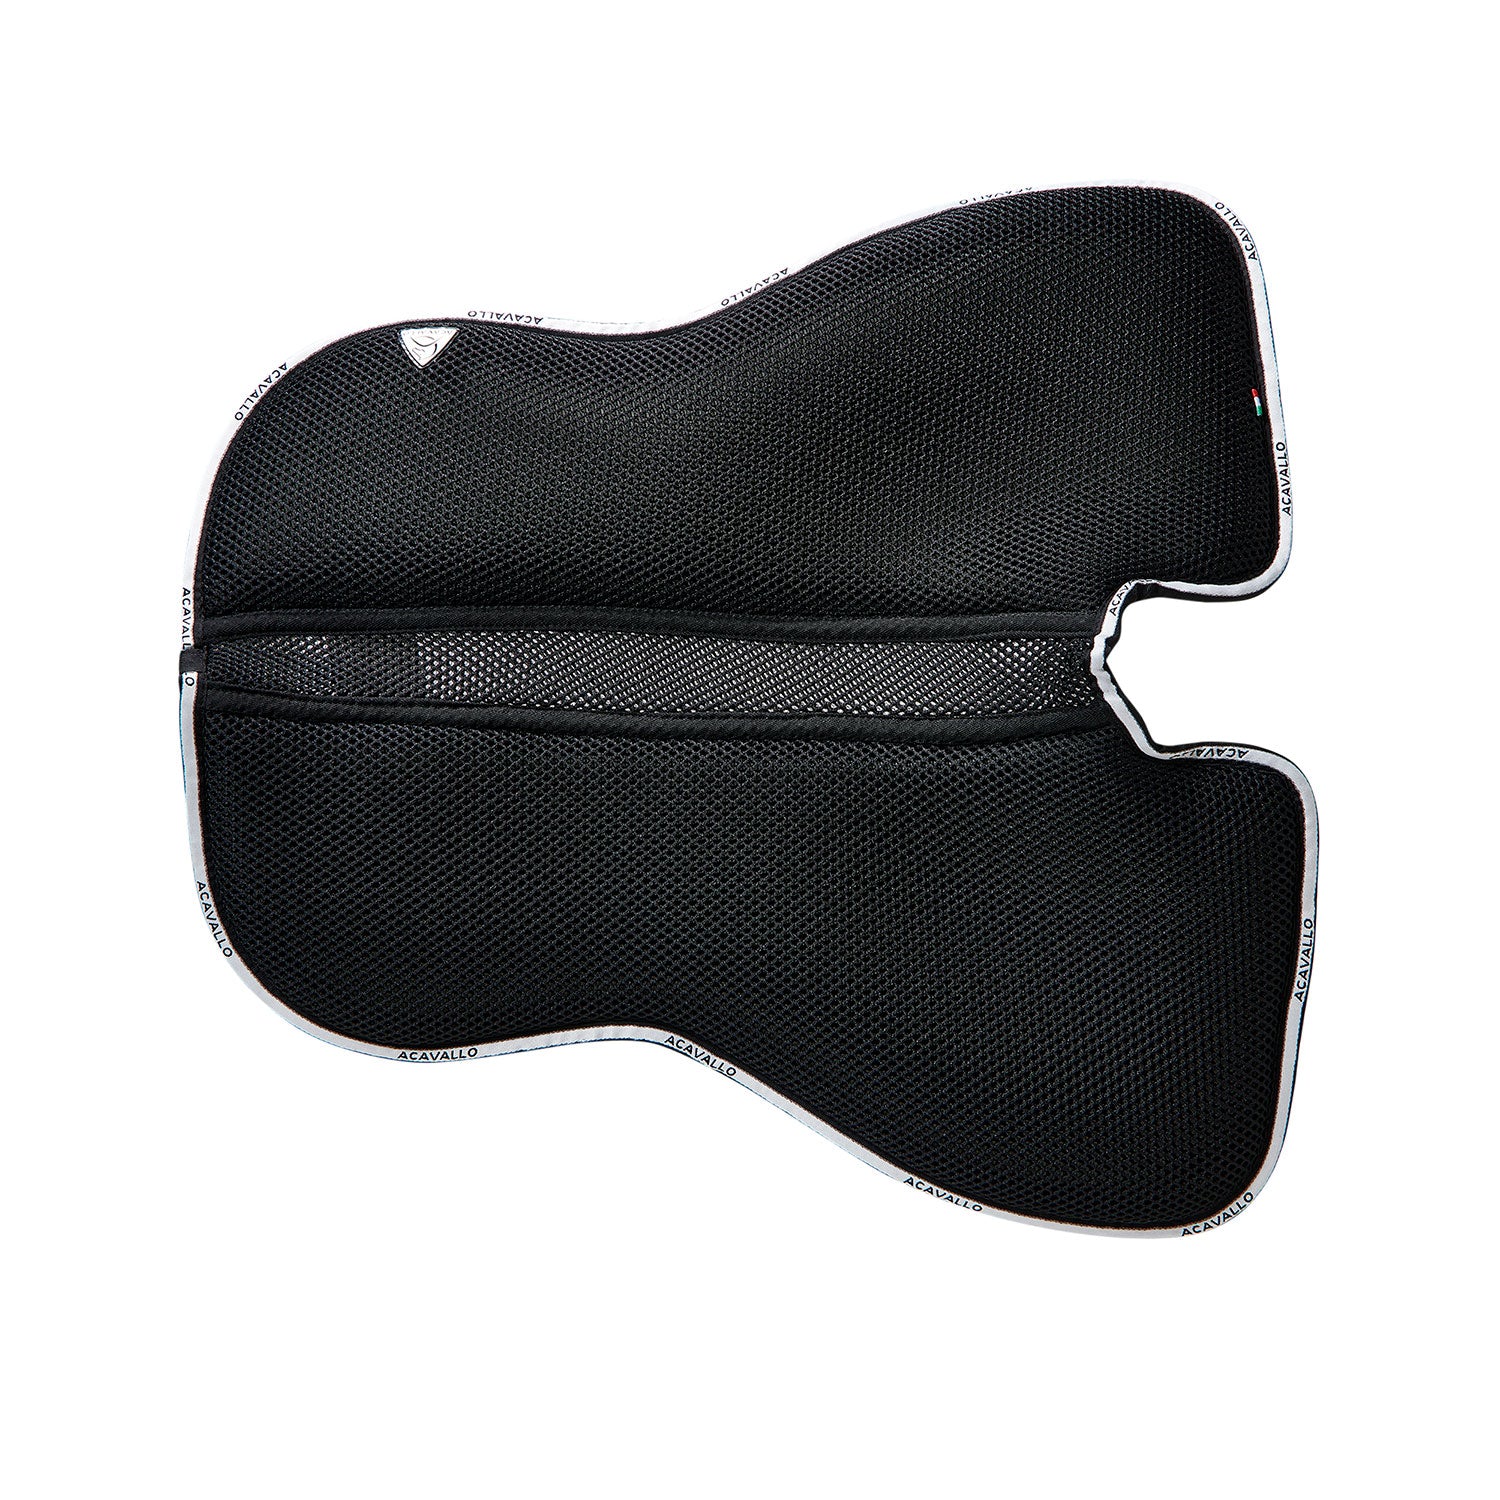 Pad Withers shaped spine free dressage pad 3D spacer microfleece - Reitstiefel Kandel - Dein Reitshop